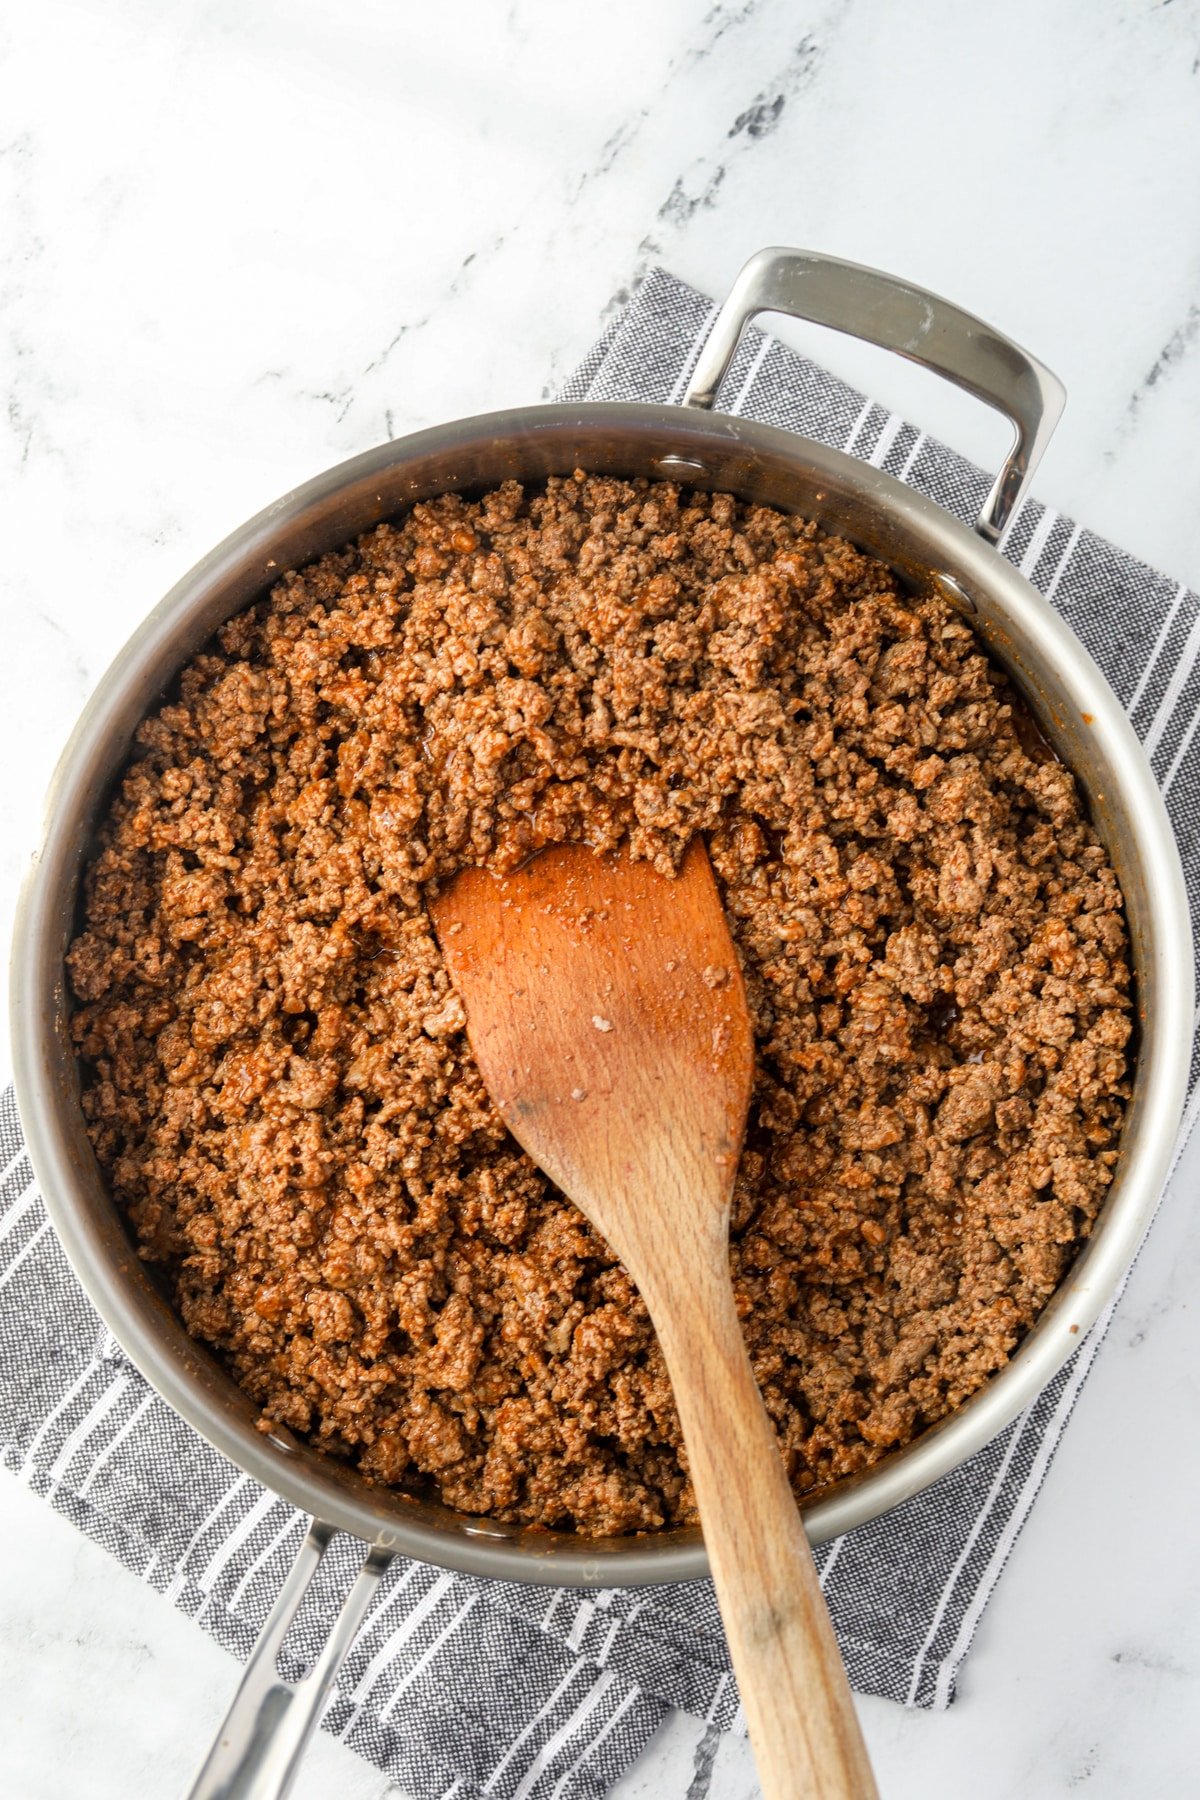 A skillet filled with ground beef taco meat.